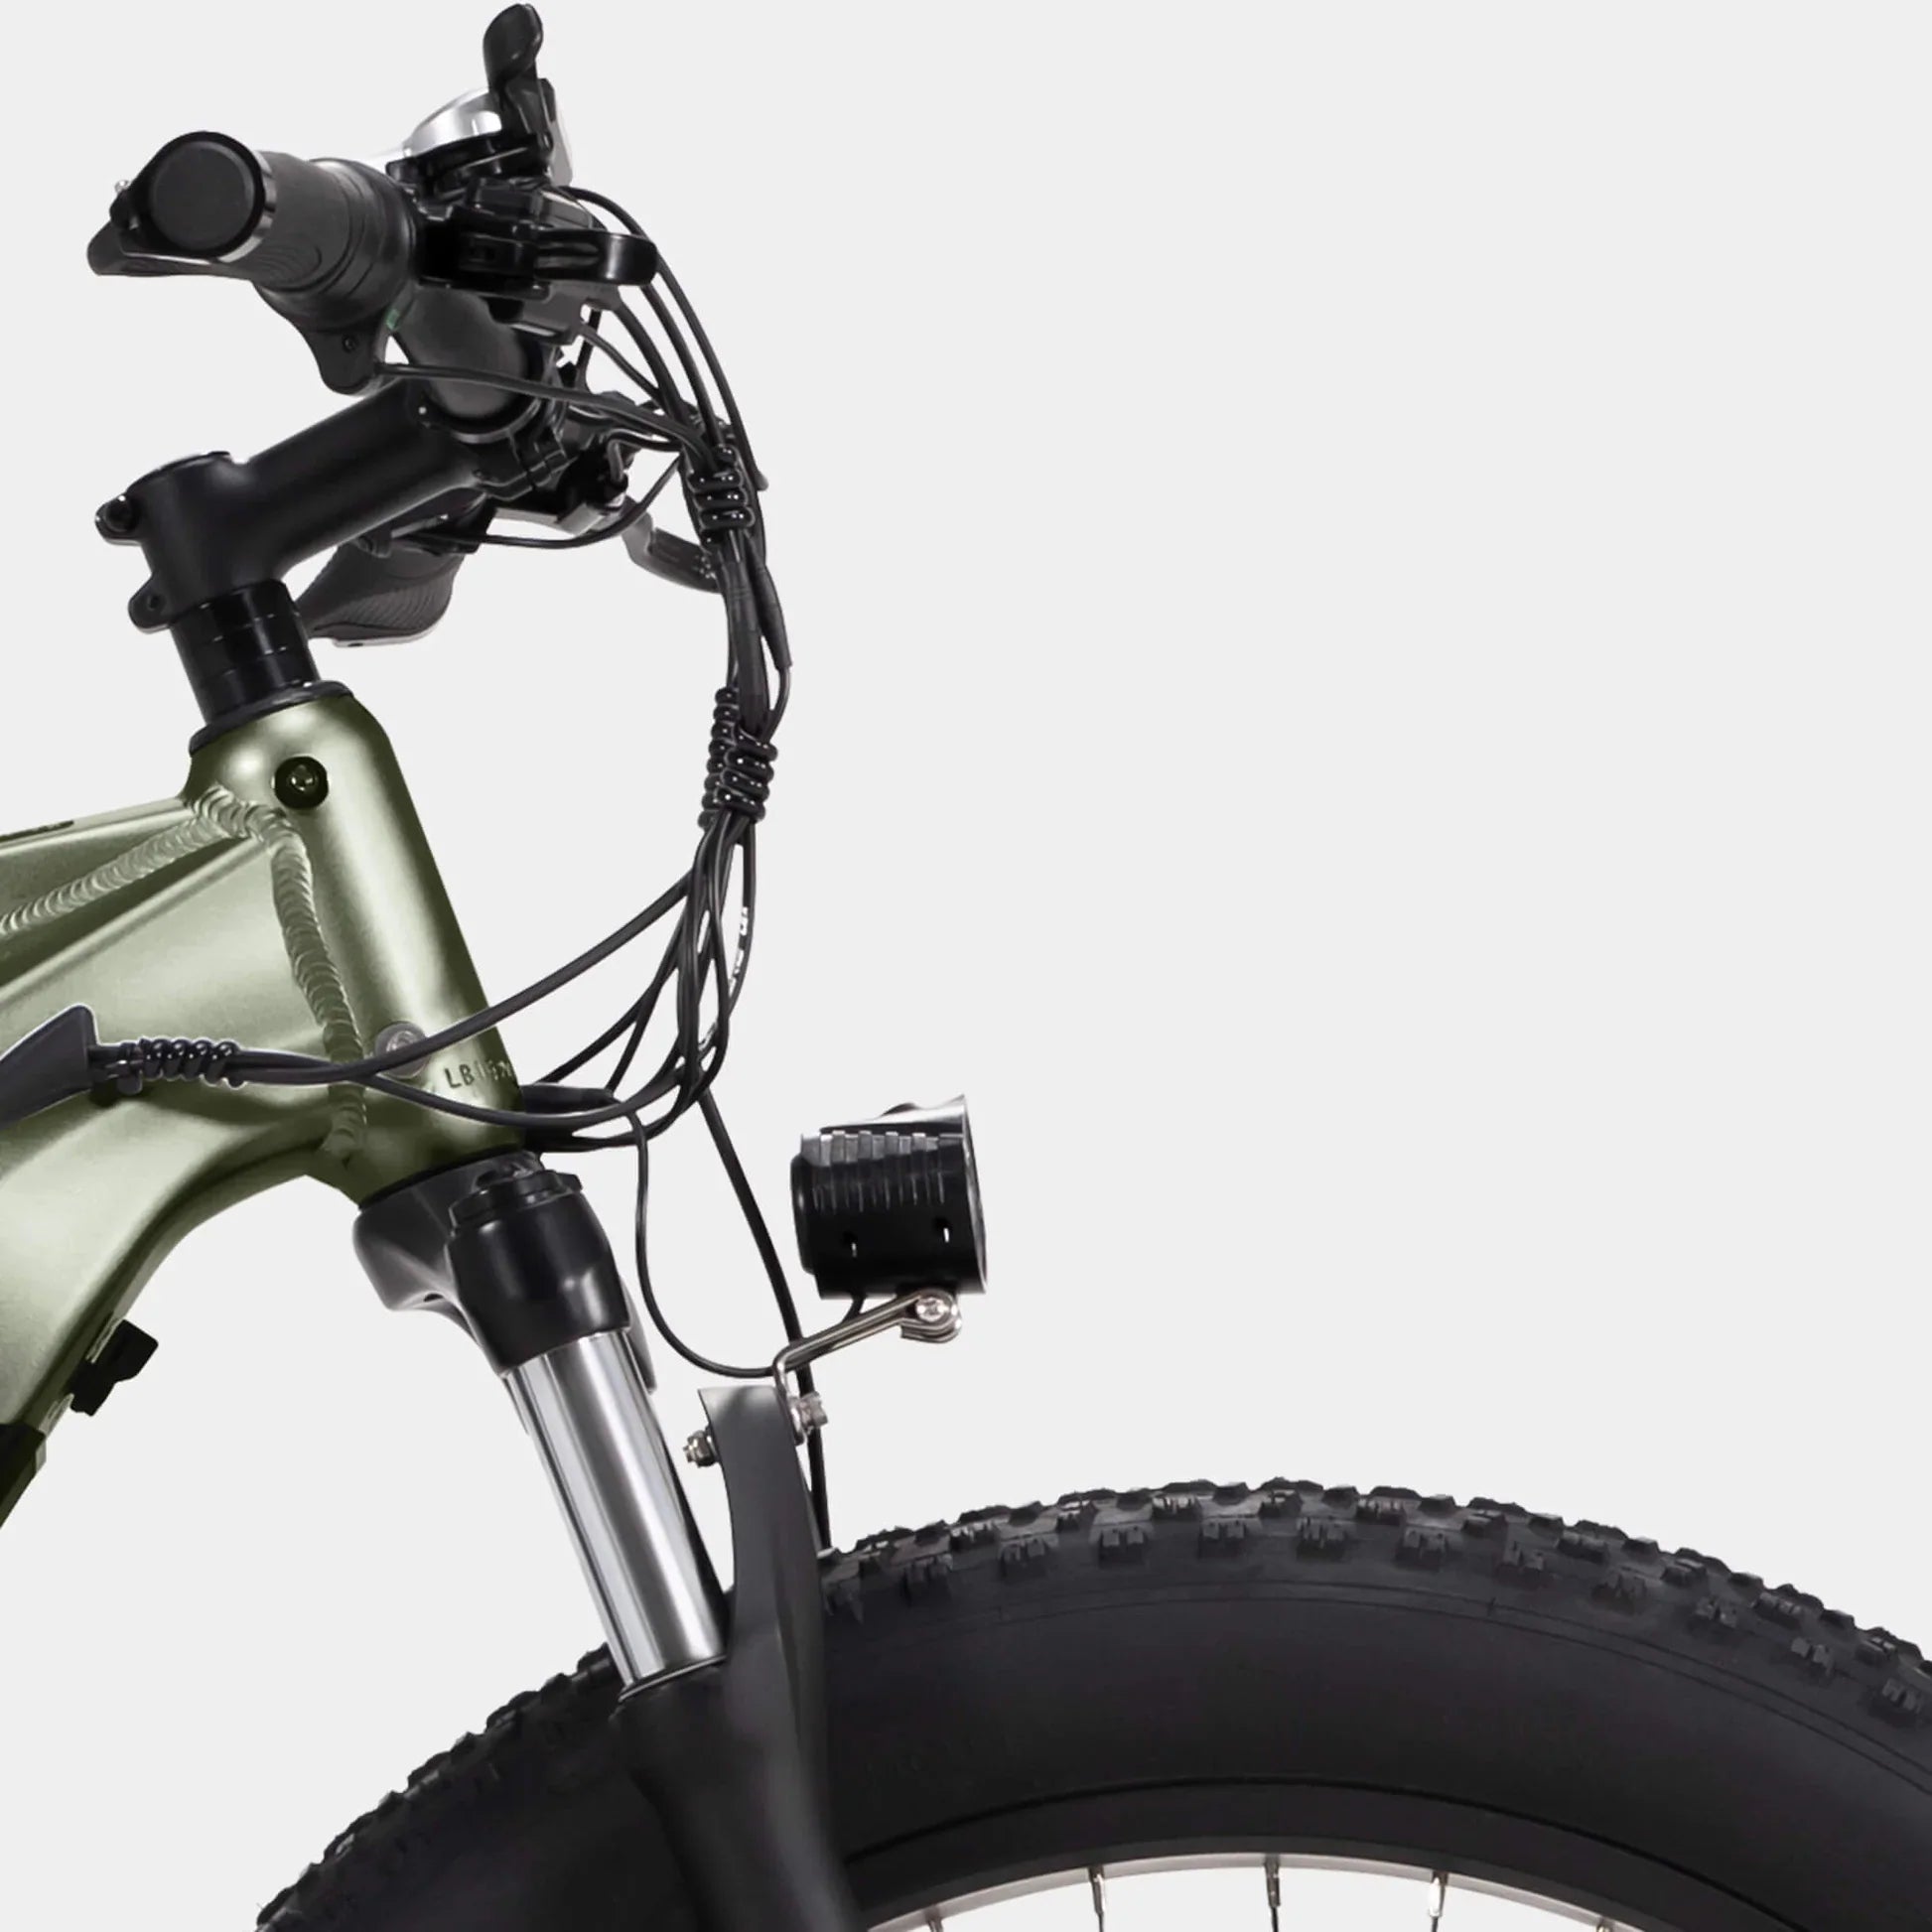 Crazybird Jumper E-Bike - Pogo cycles UK -cycle to work scheme available